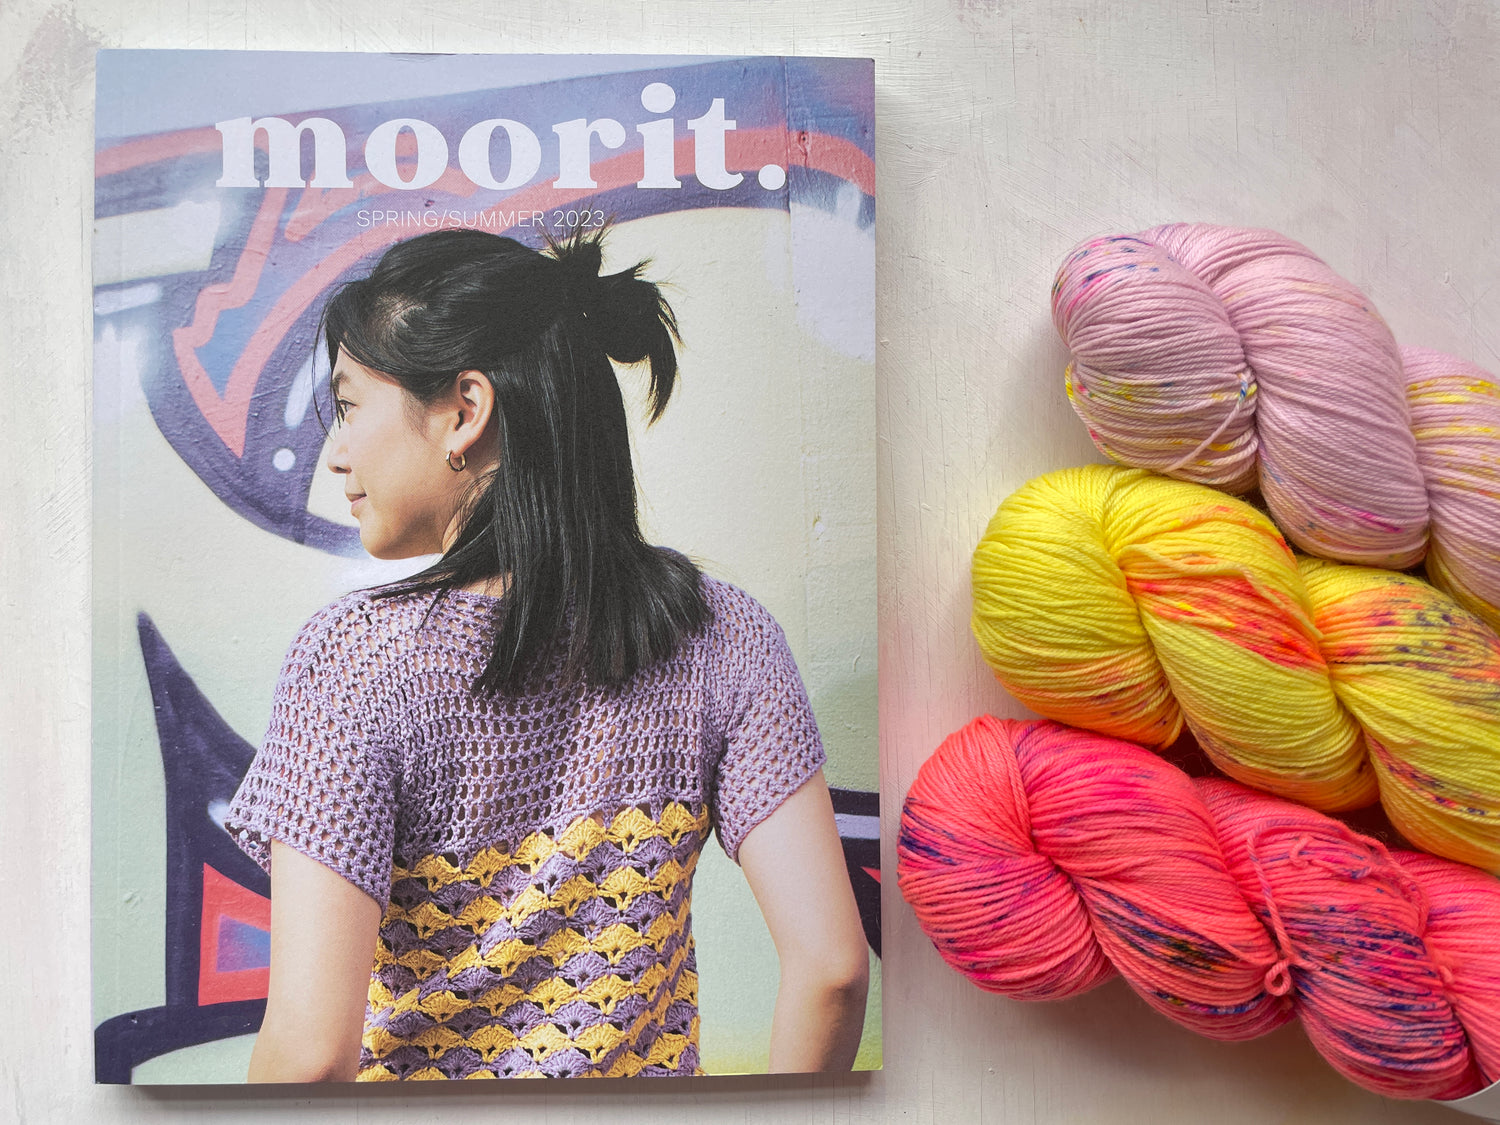 Books Magazines and Patterns collection from the hand dyed yarn expert, The Wool Kitchen